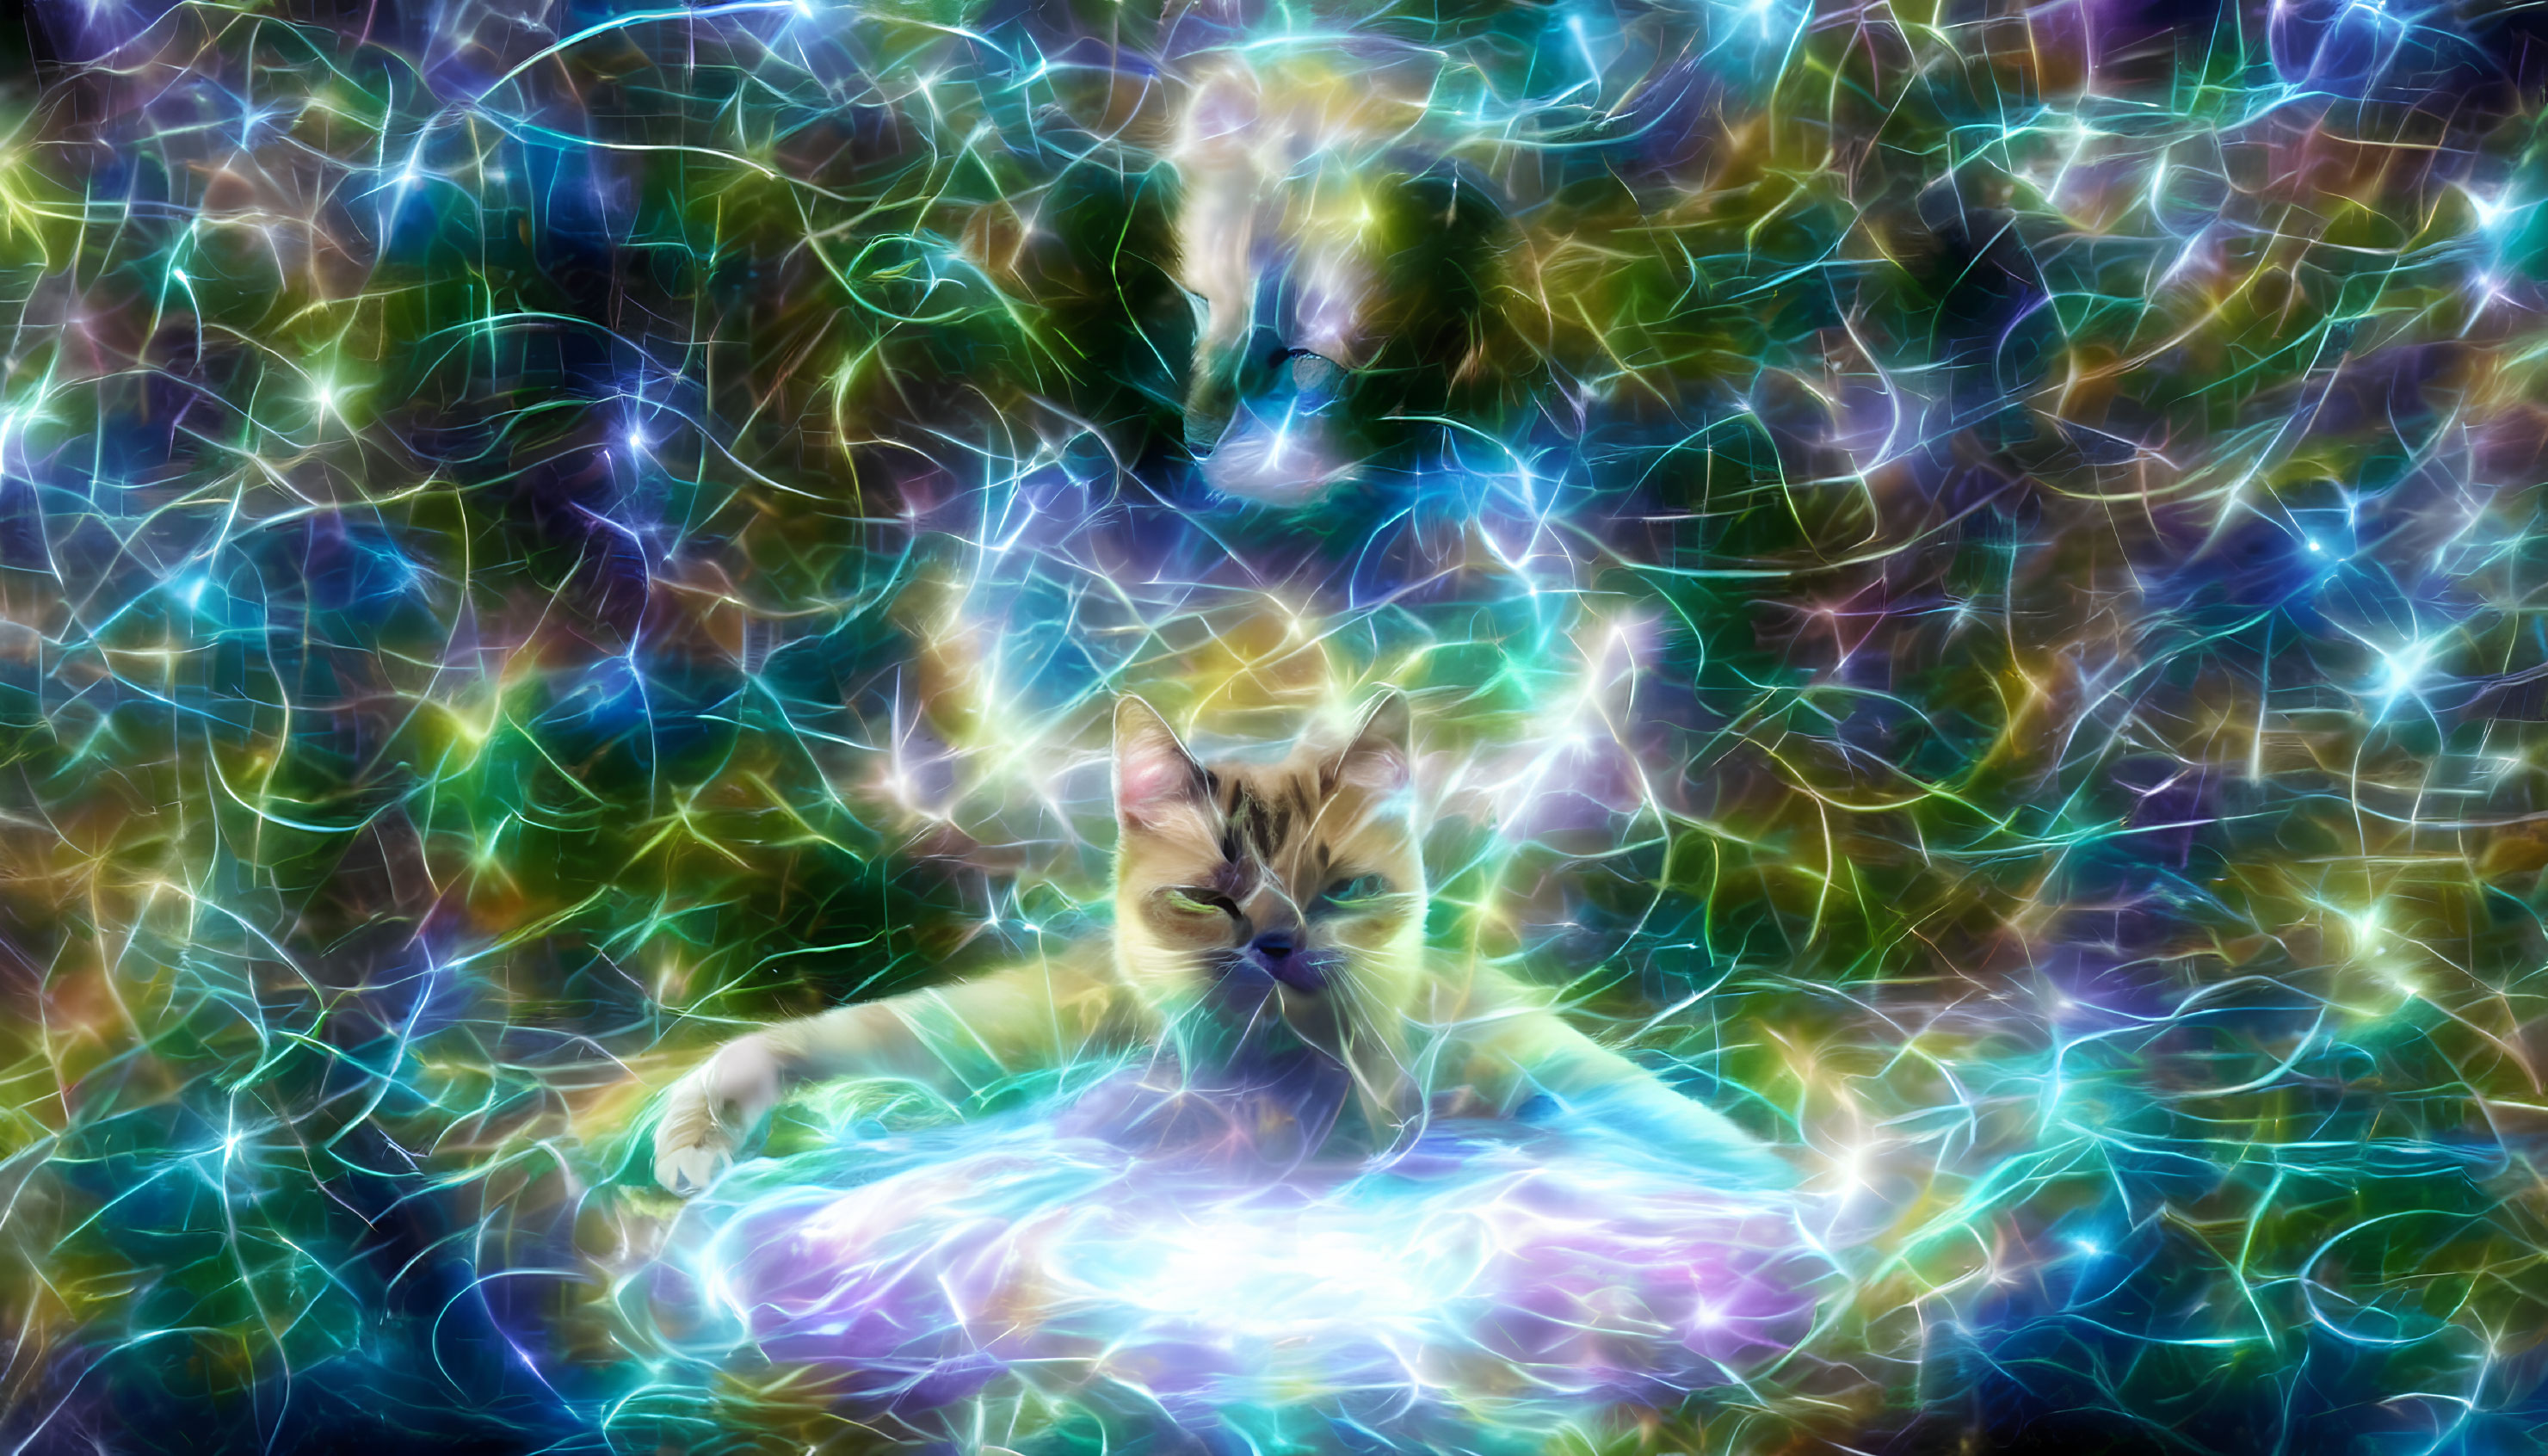 Colorful digital art: Cat with ethereal aura amid swirling lights